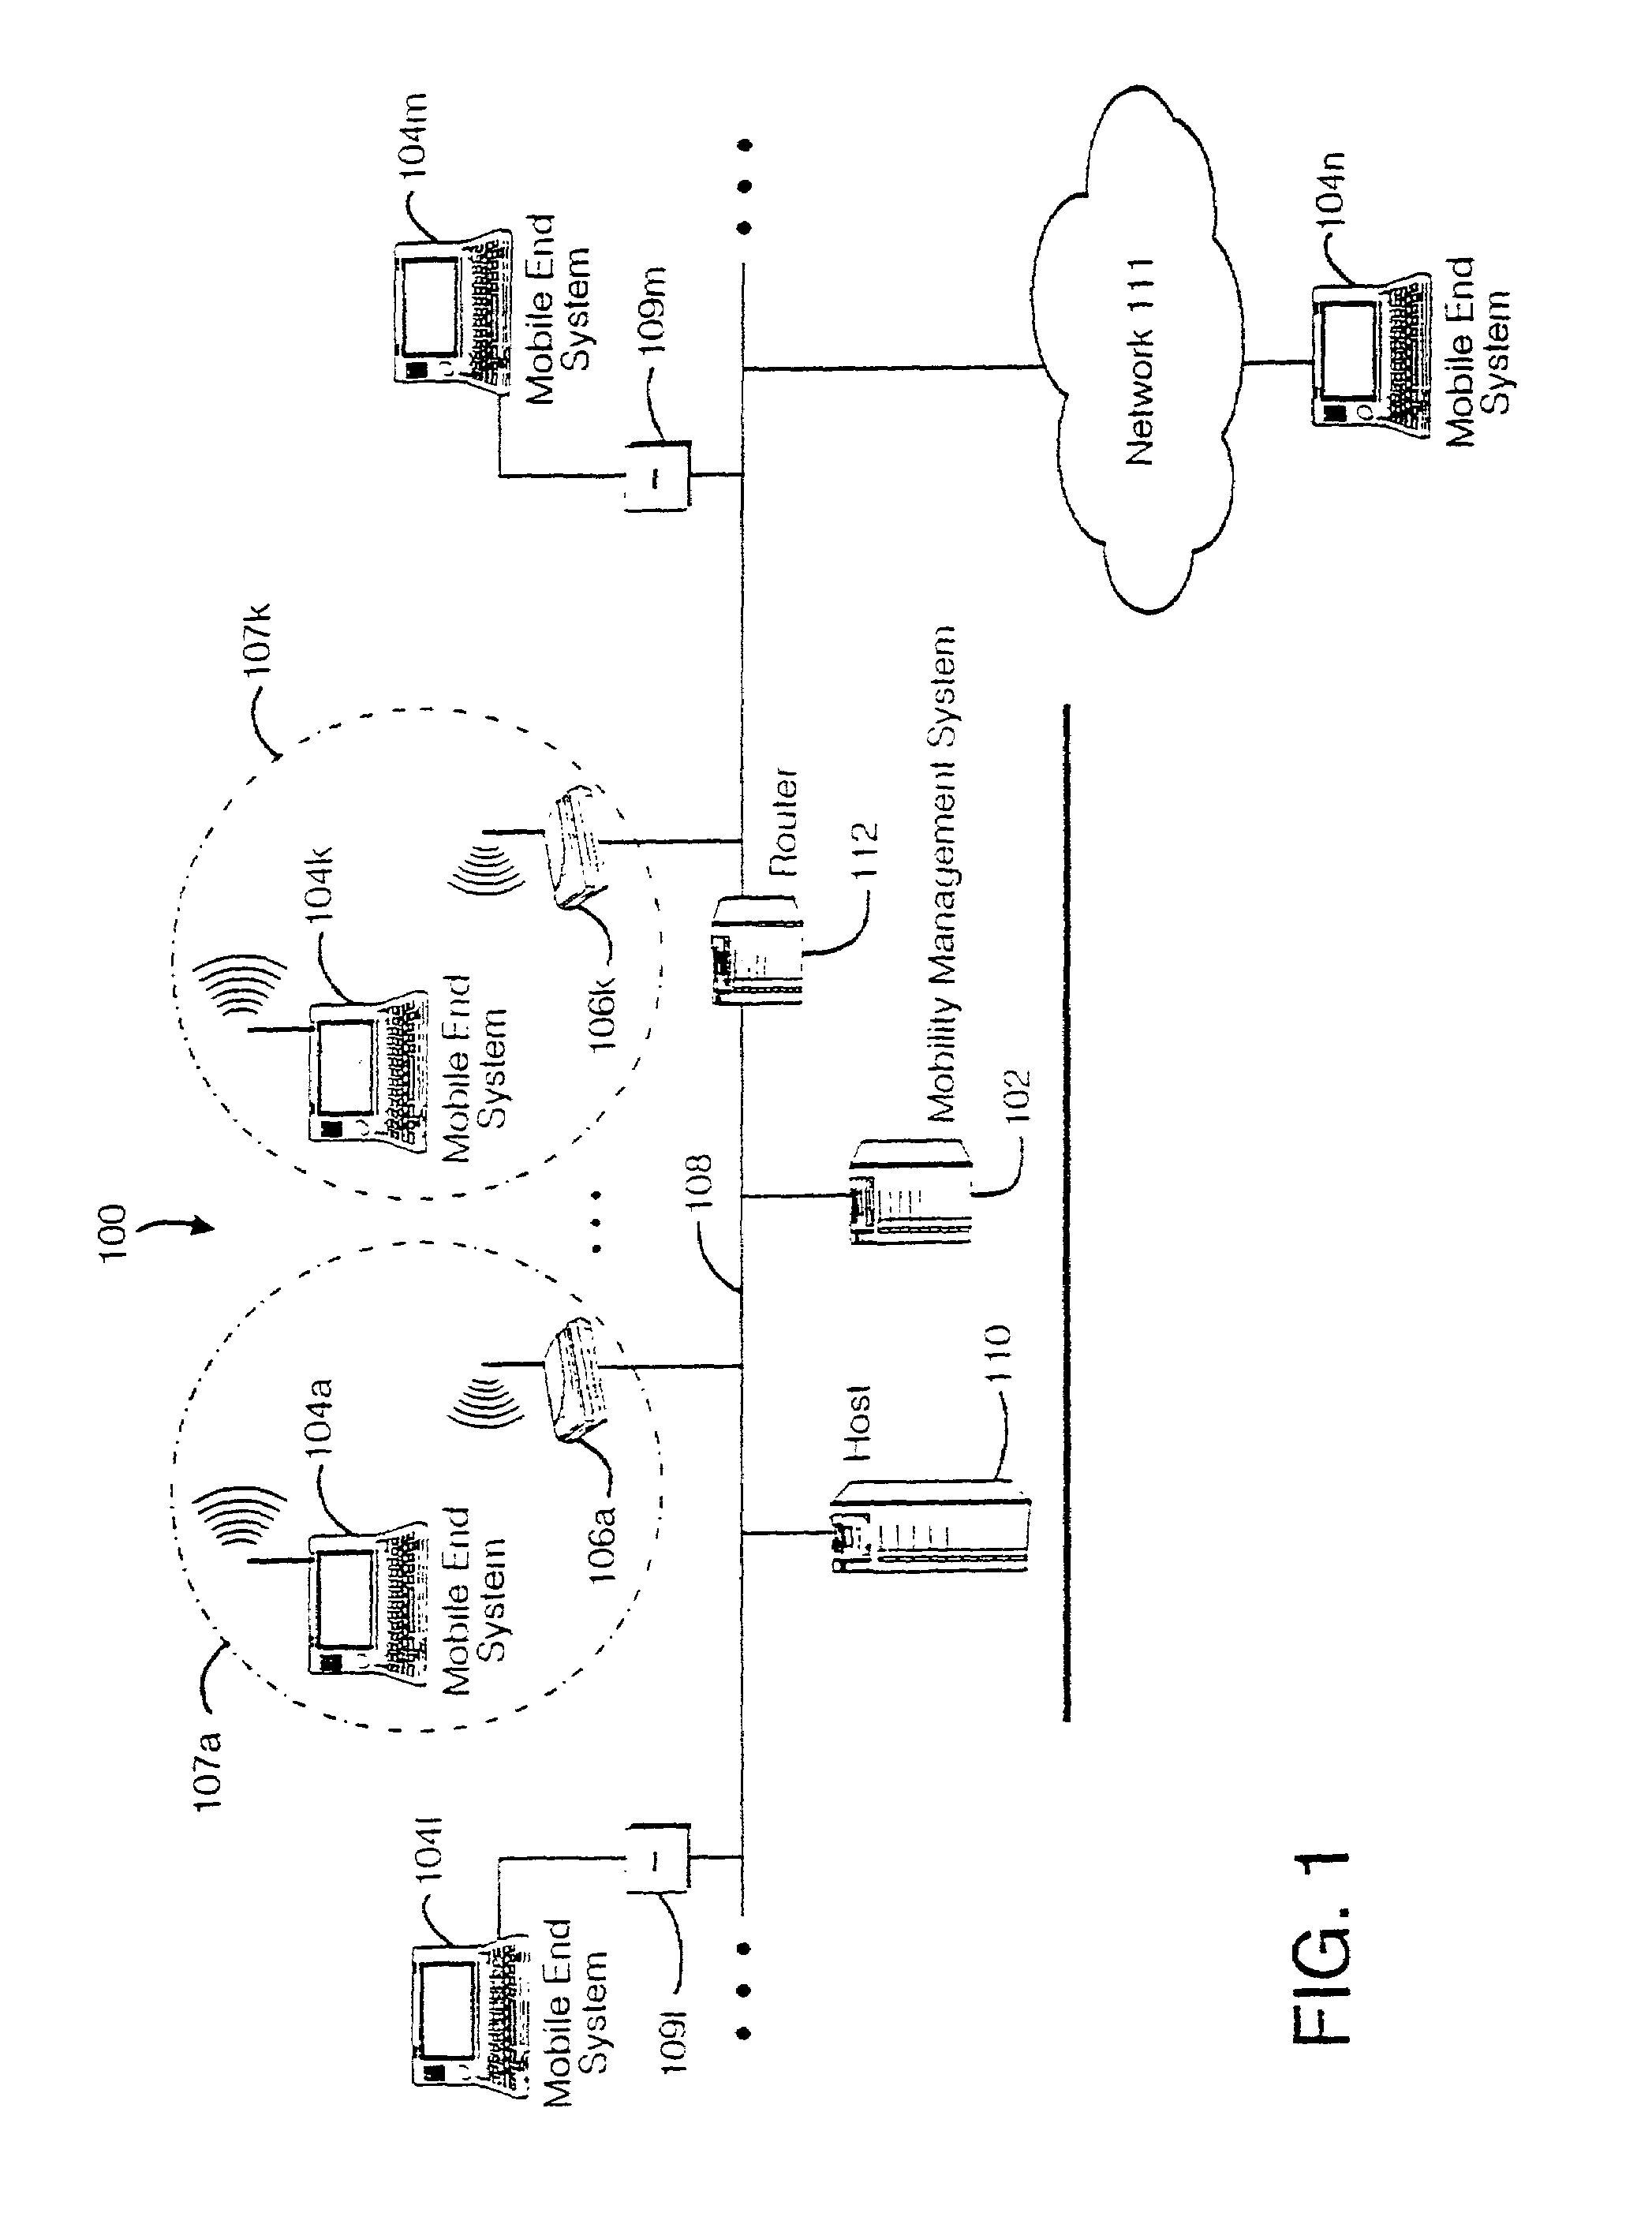 Method and apparatus for providing mobile and other intermittent connectivity in a computing environment